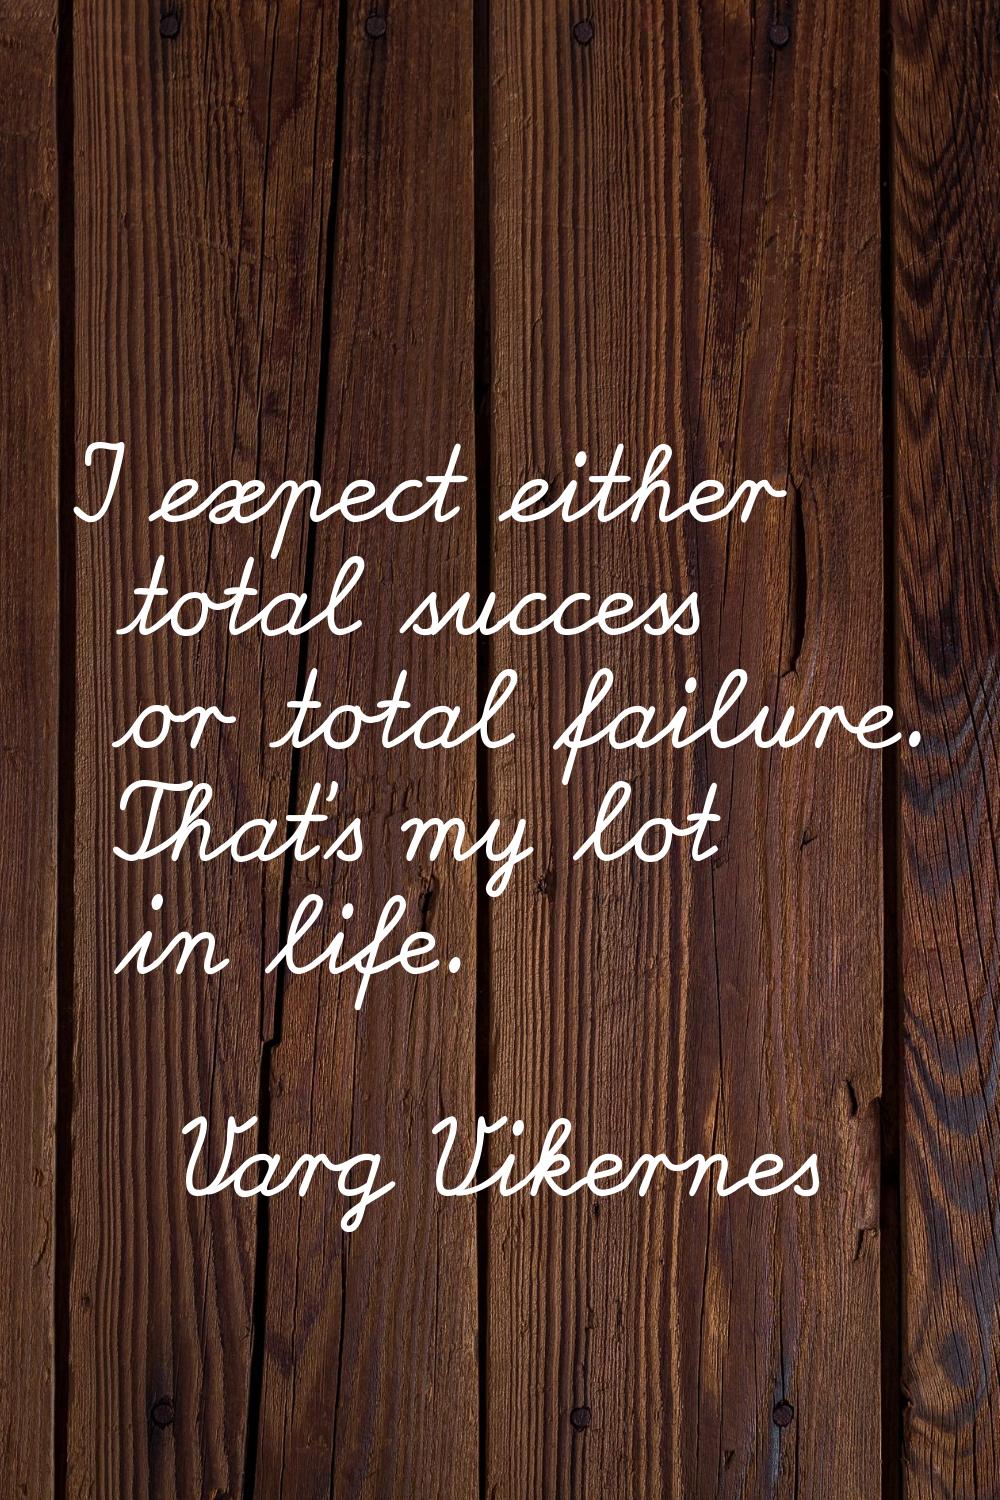 I expect either total success or total failure. That's my lot in life.